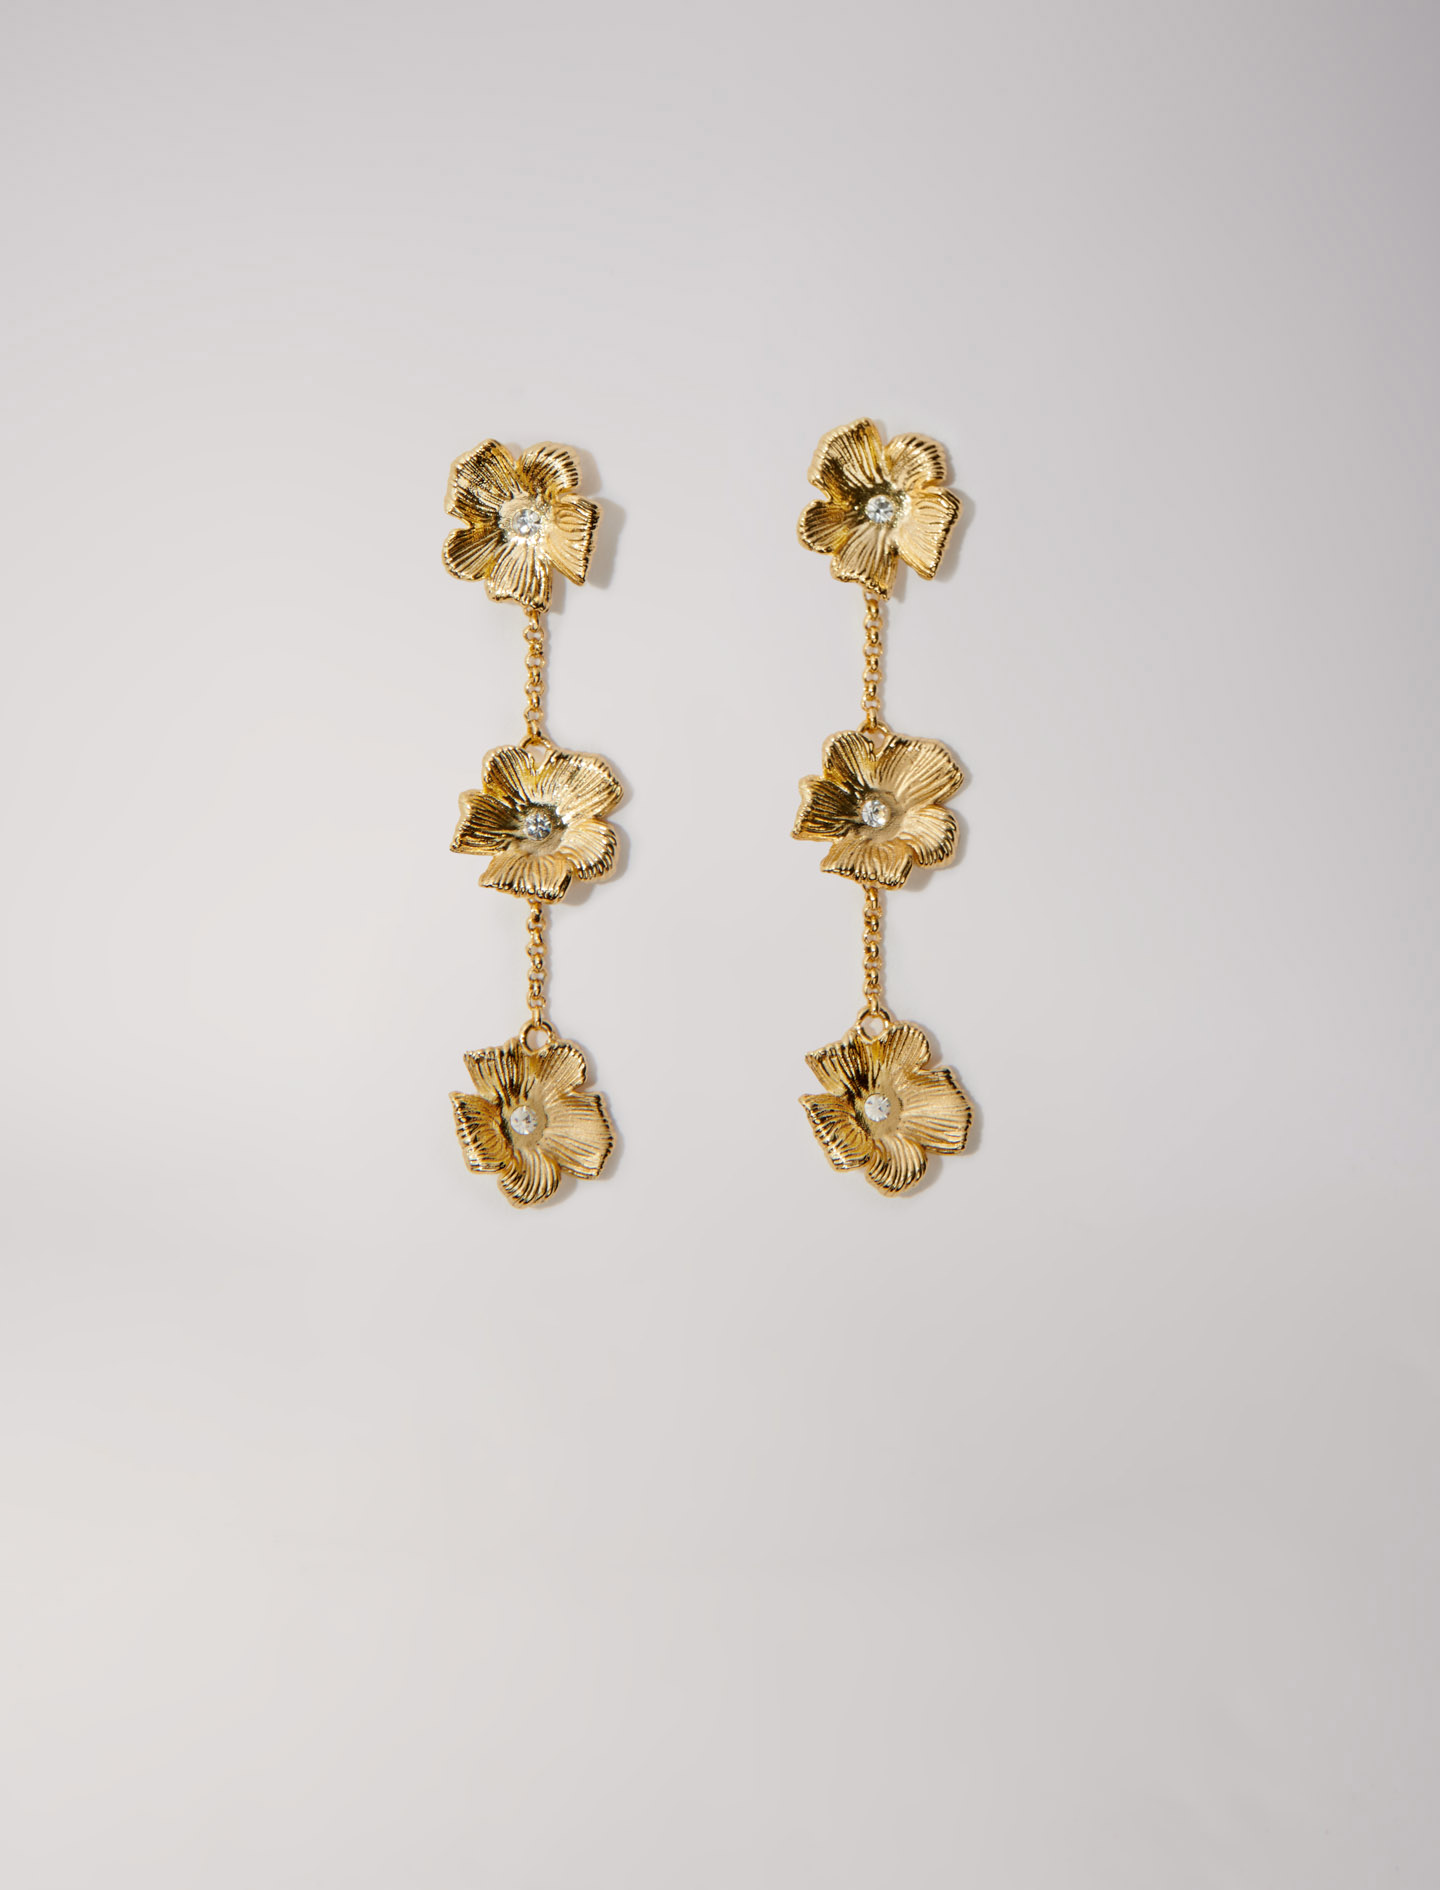 Maje Woman's glass Jewellery: Flower earrings for Fall/Winter, in color Gold / Yellow